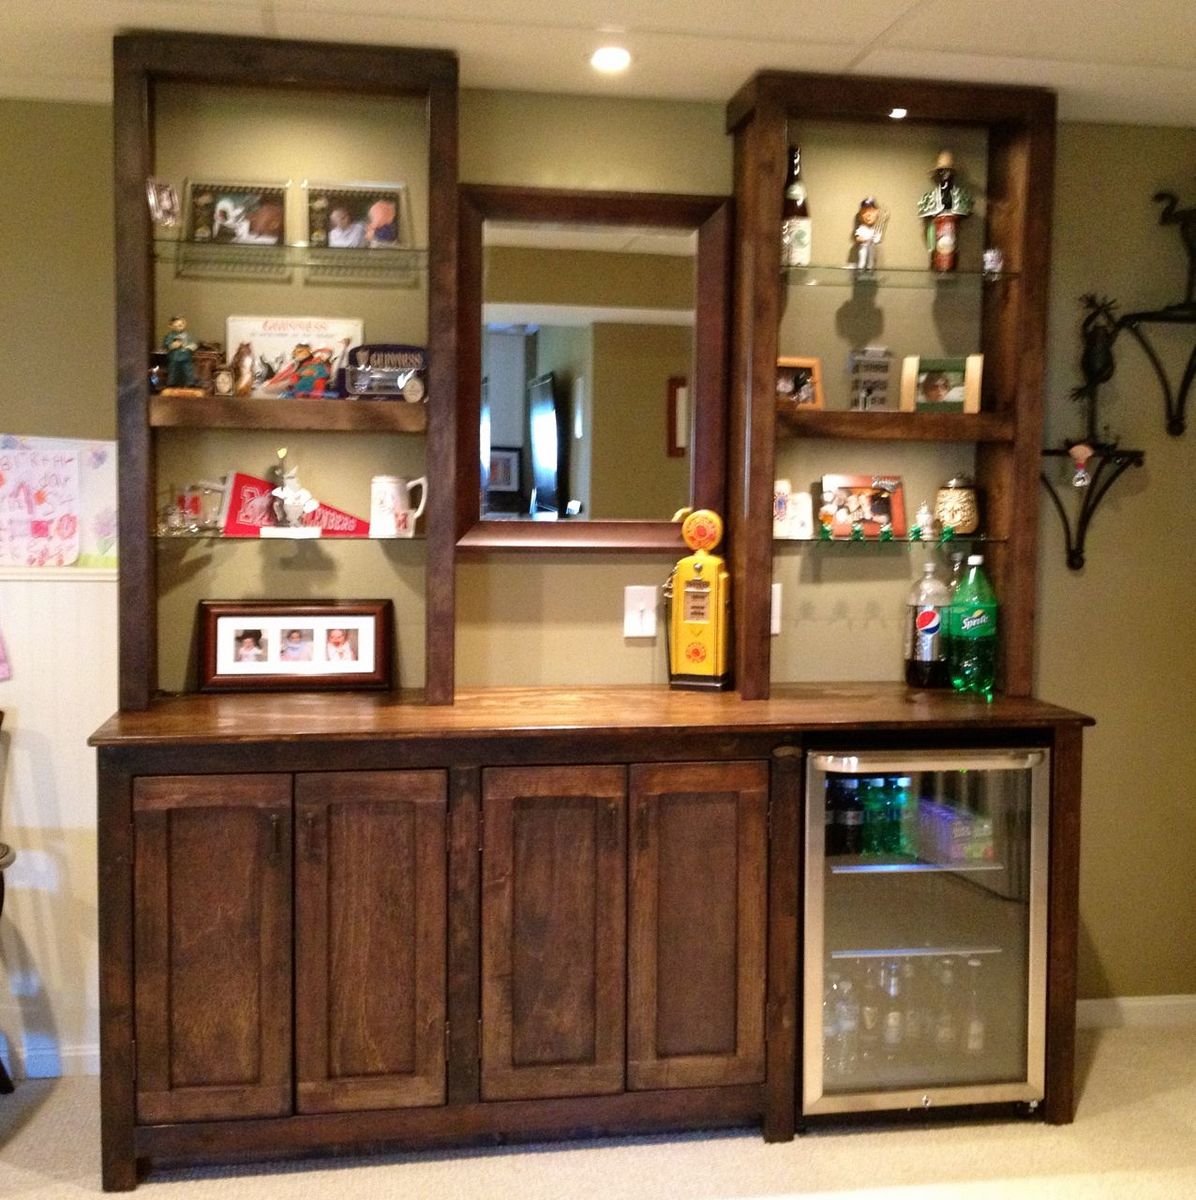 Basement bar with cabinets and glass shelves.